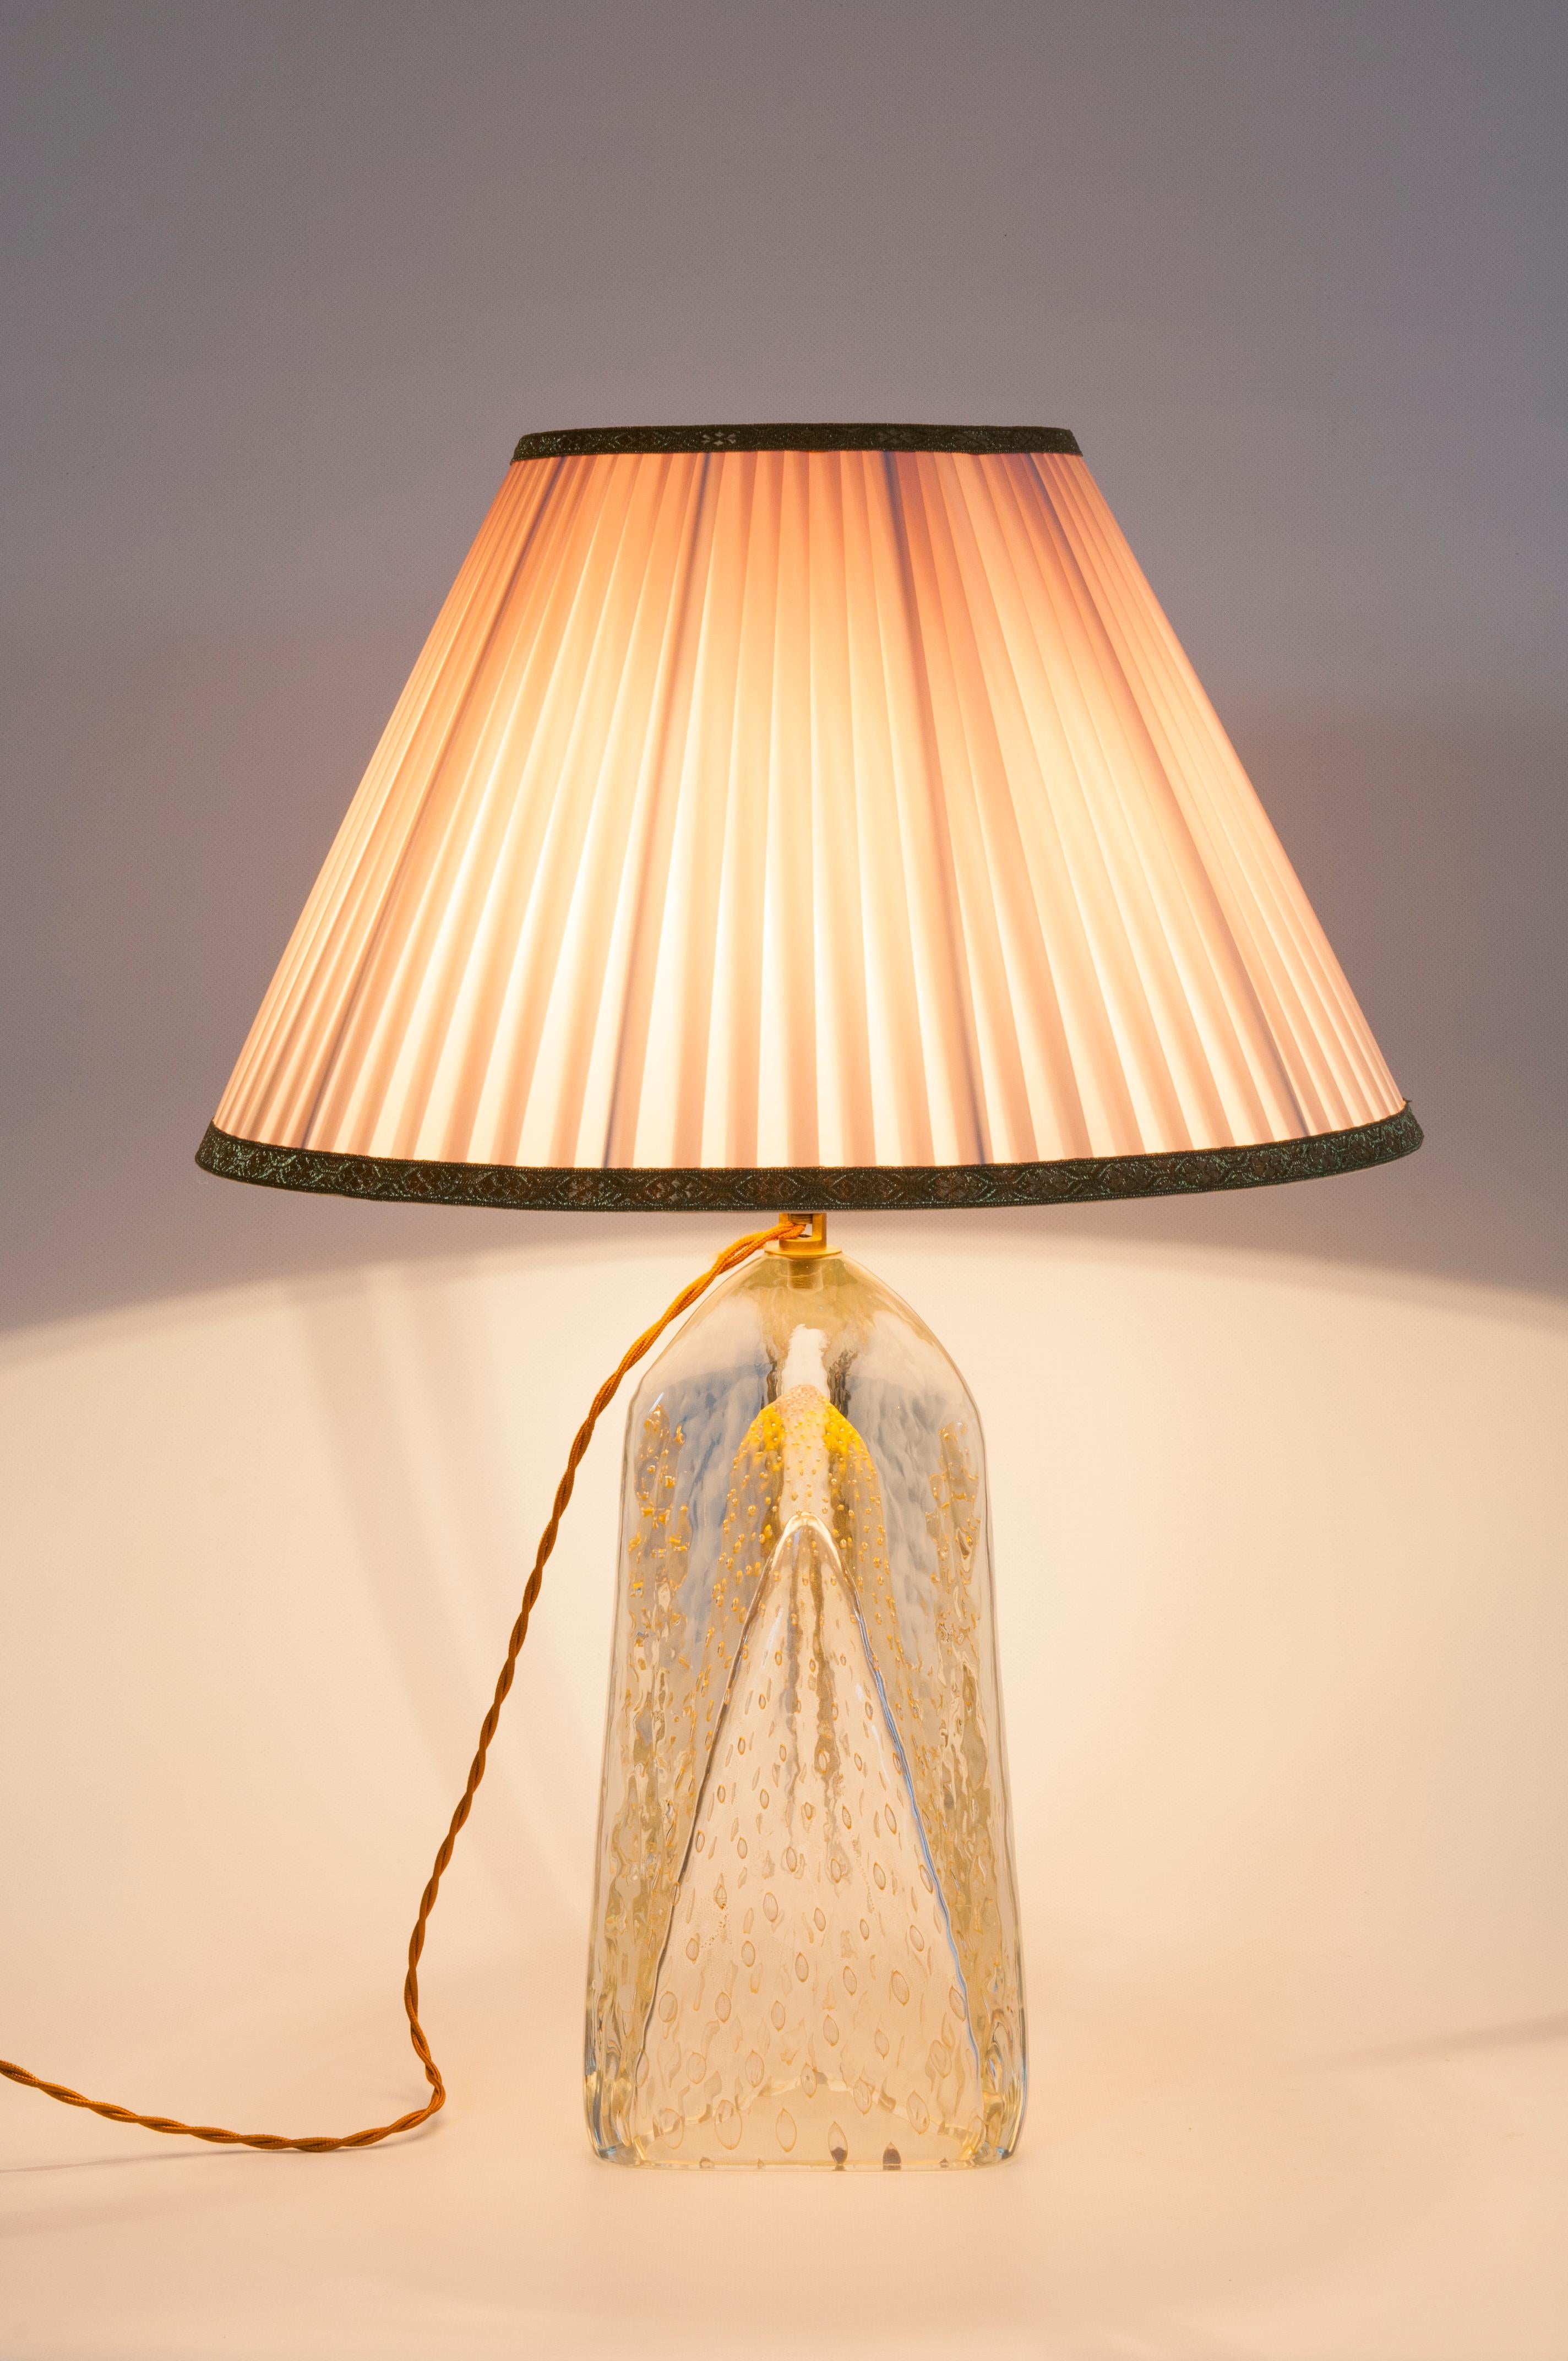 Pair of Murano Glass Triangle-Shaped Lamps with 24-Carat Gold, 1980s For Sale 12